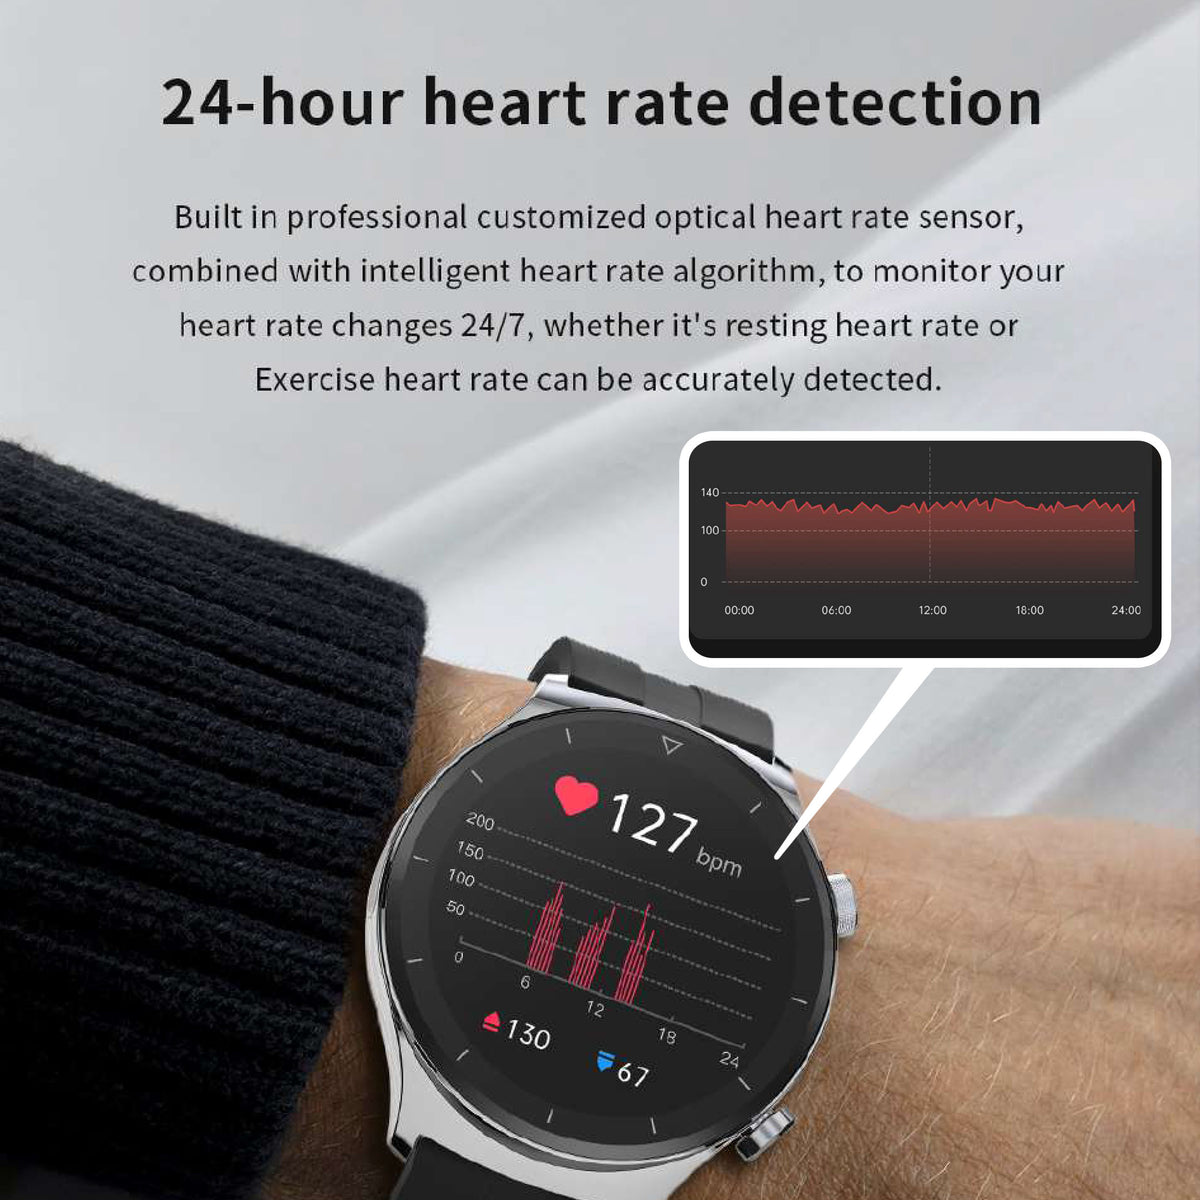 G5 Blood Pressure Smartwatch - Health Sleep Monitoring Life Assistant - FDA Approved